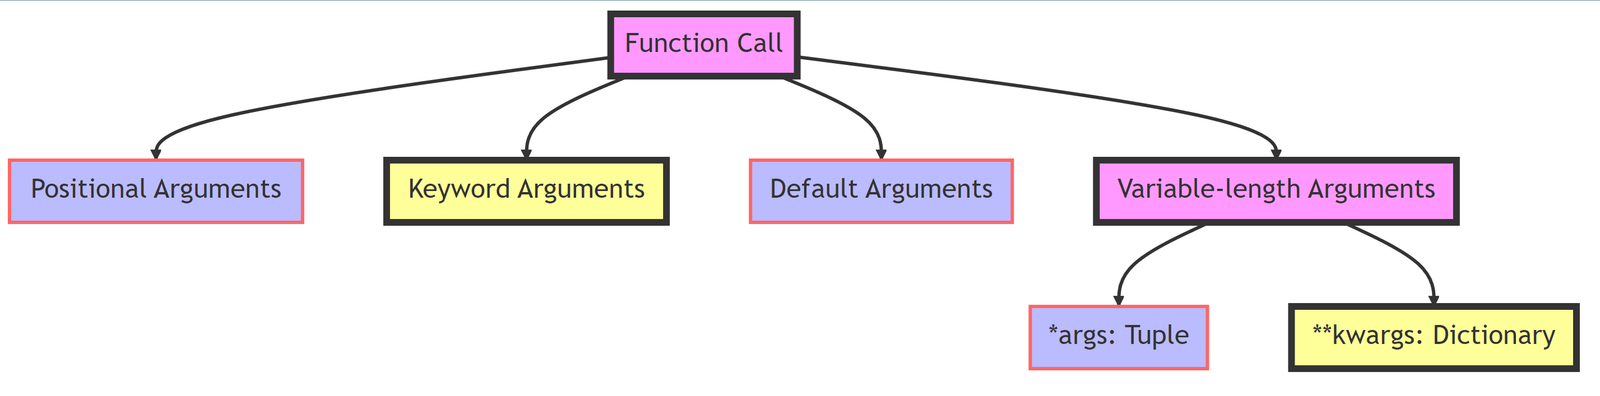 Python Arguments: Positional, Keyword, and More